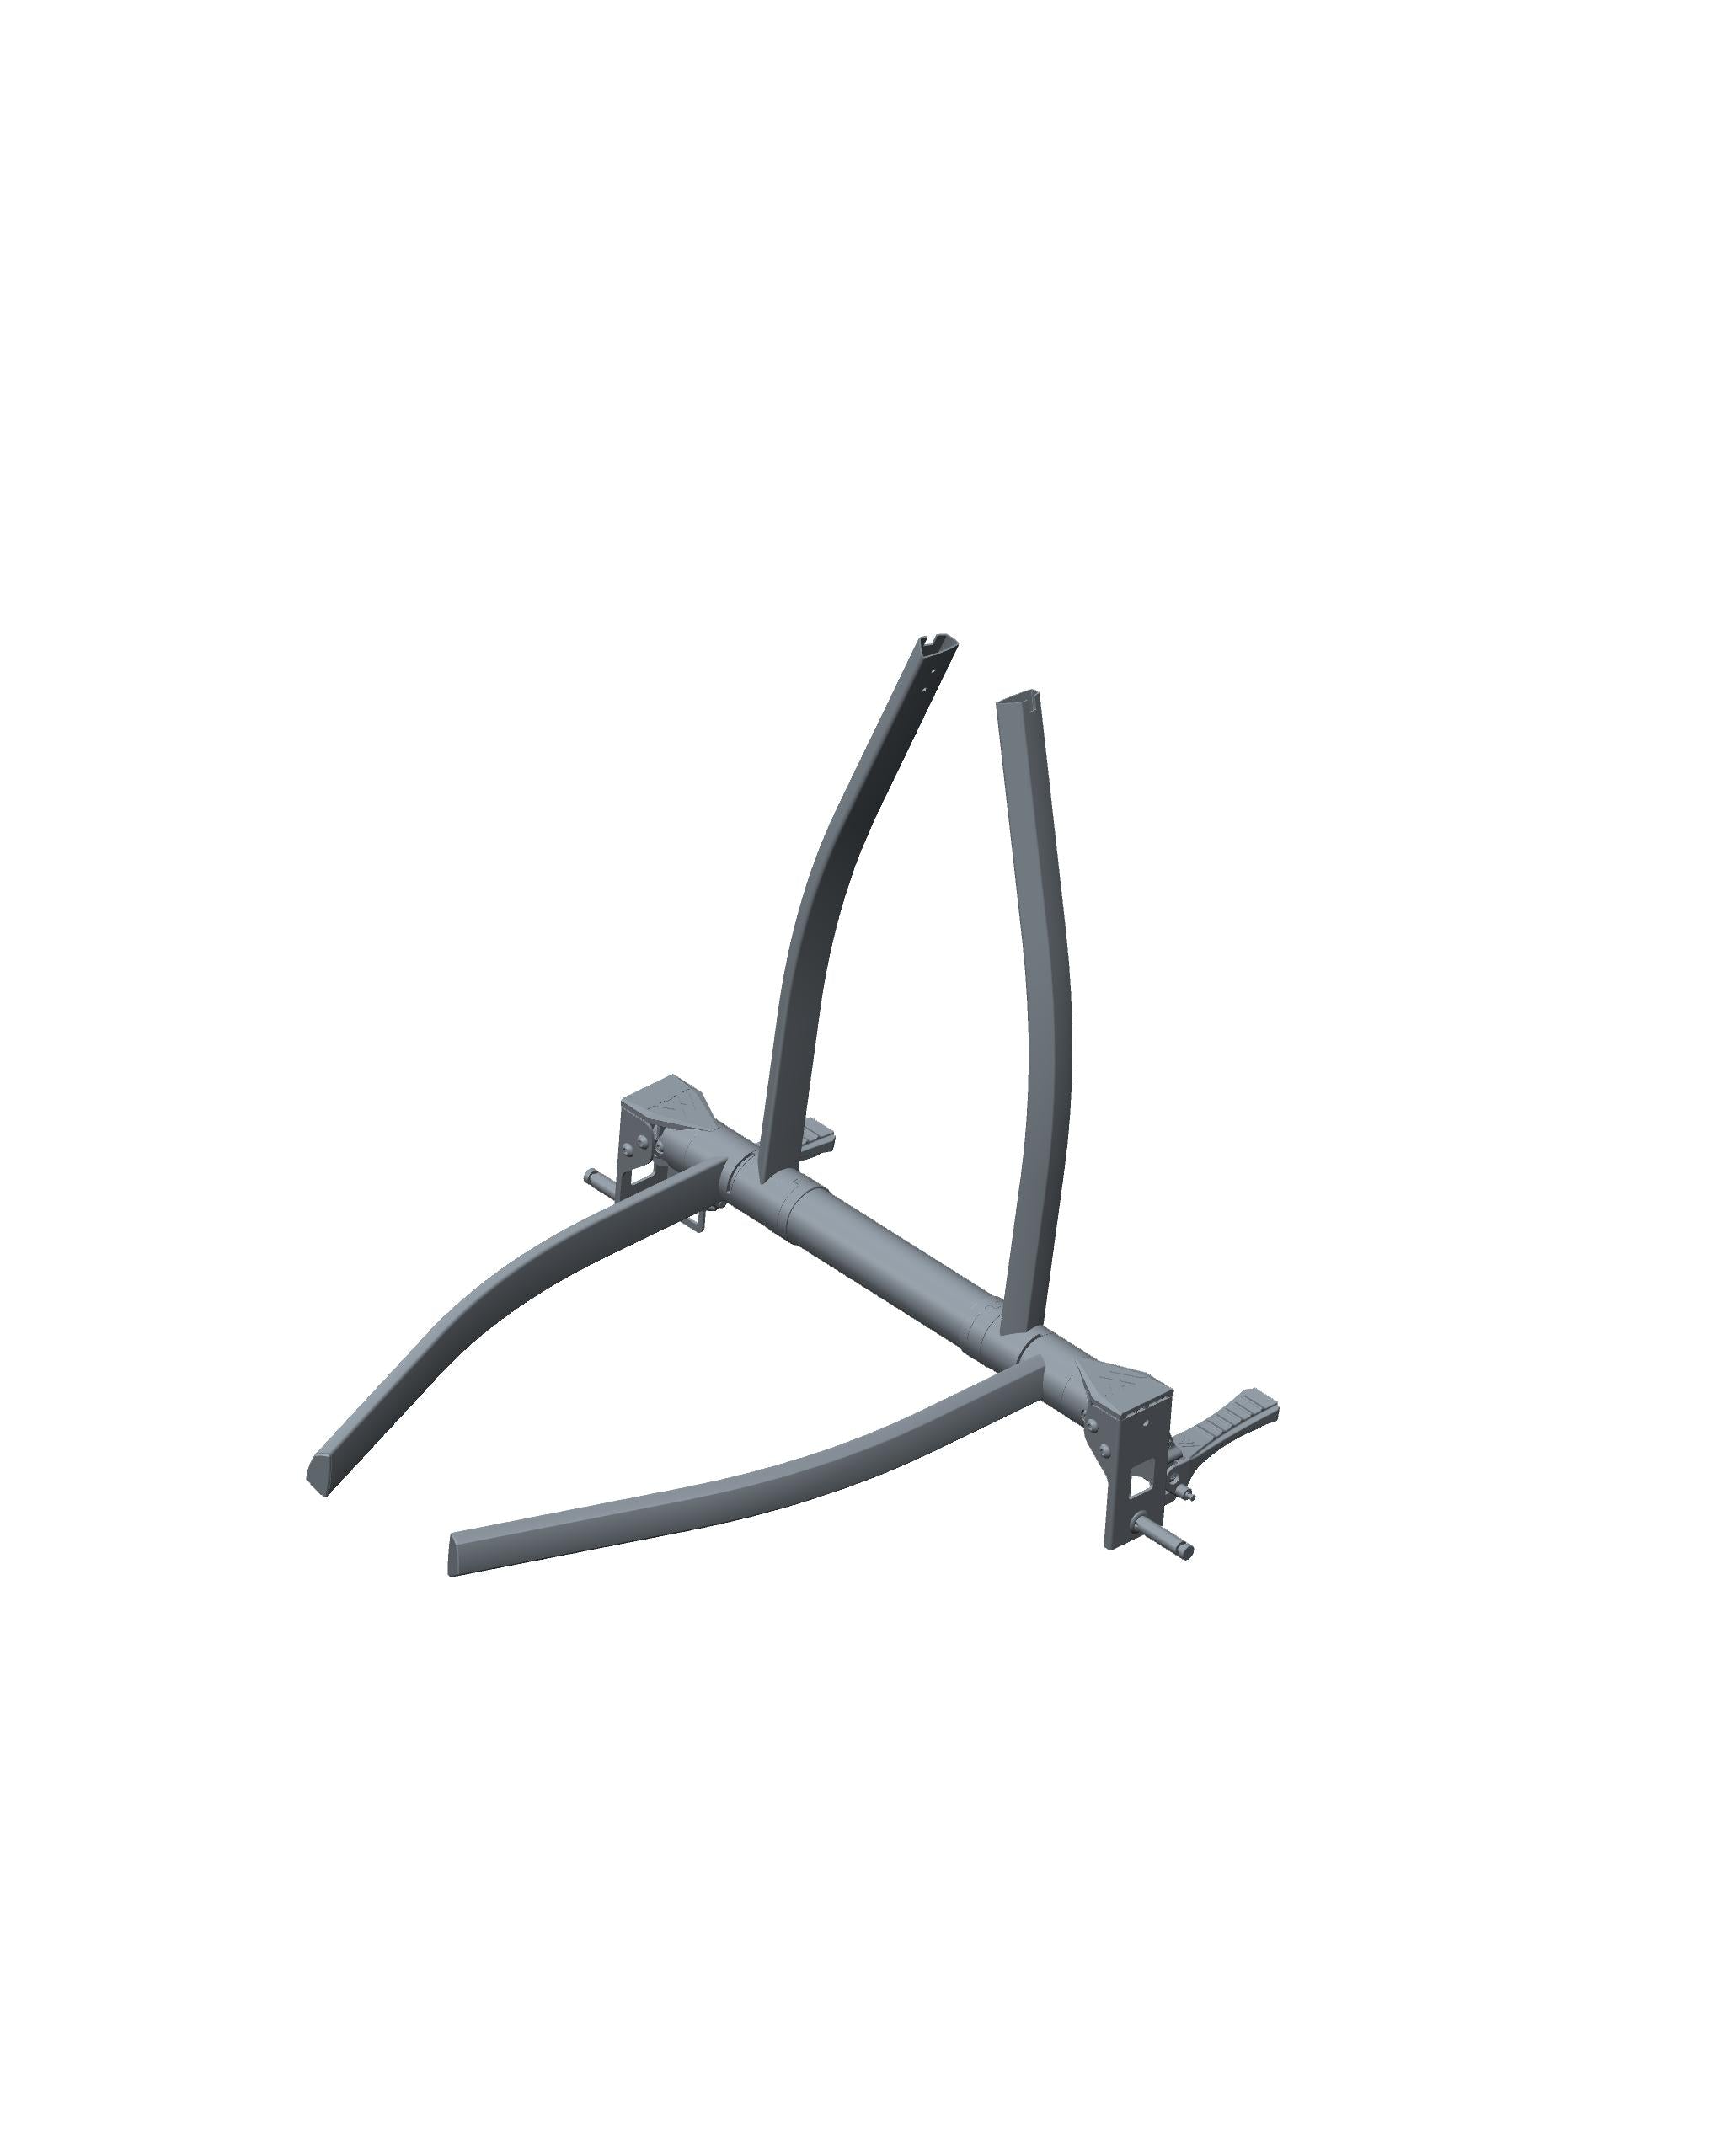 Spare part: complete frame + wheel axle for Blade+